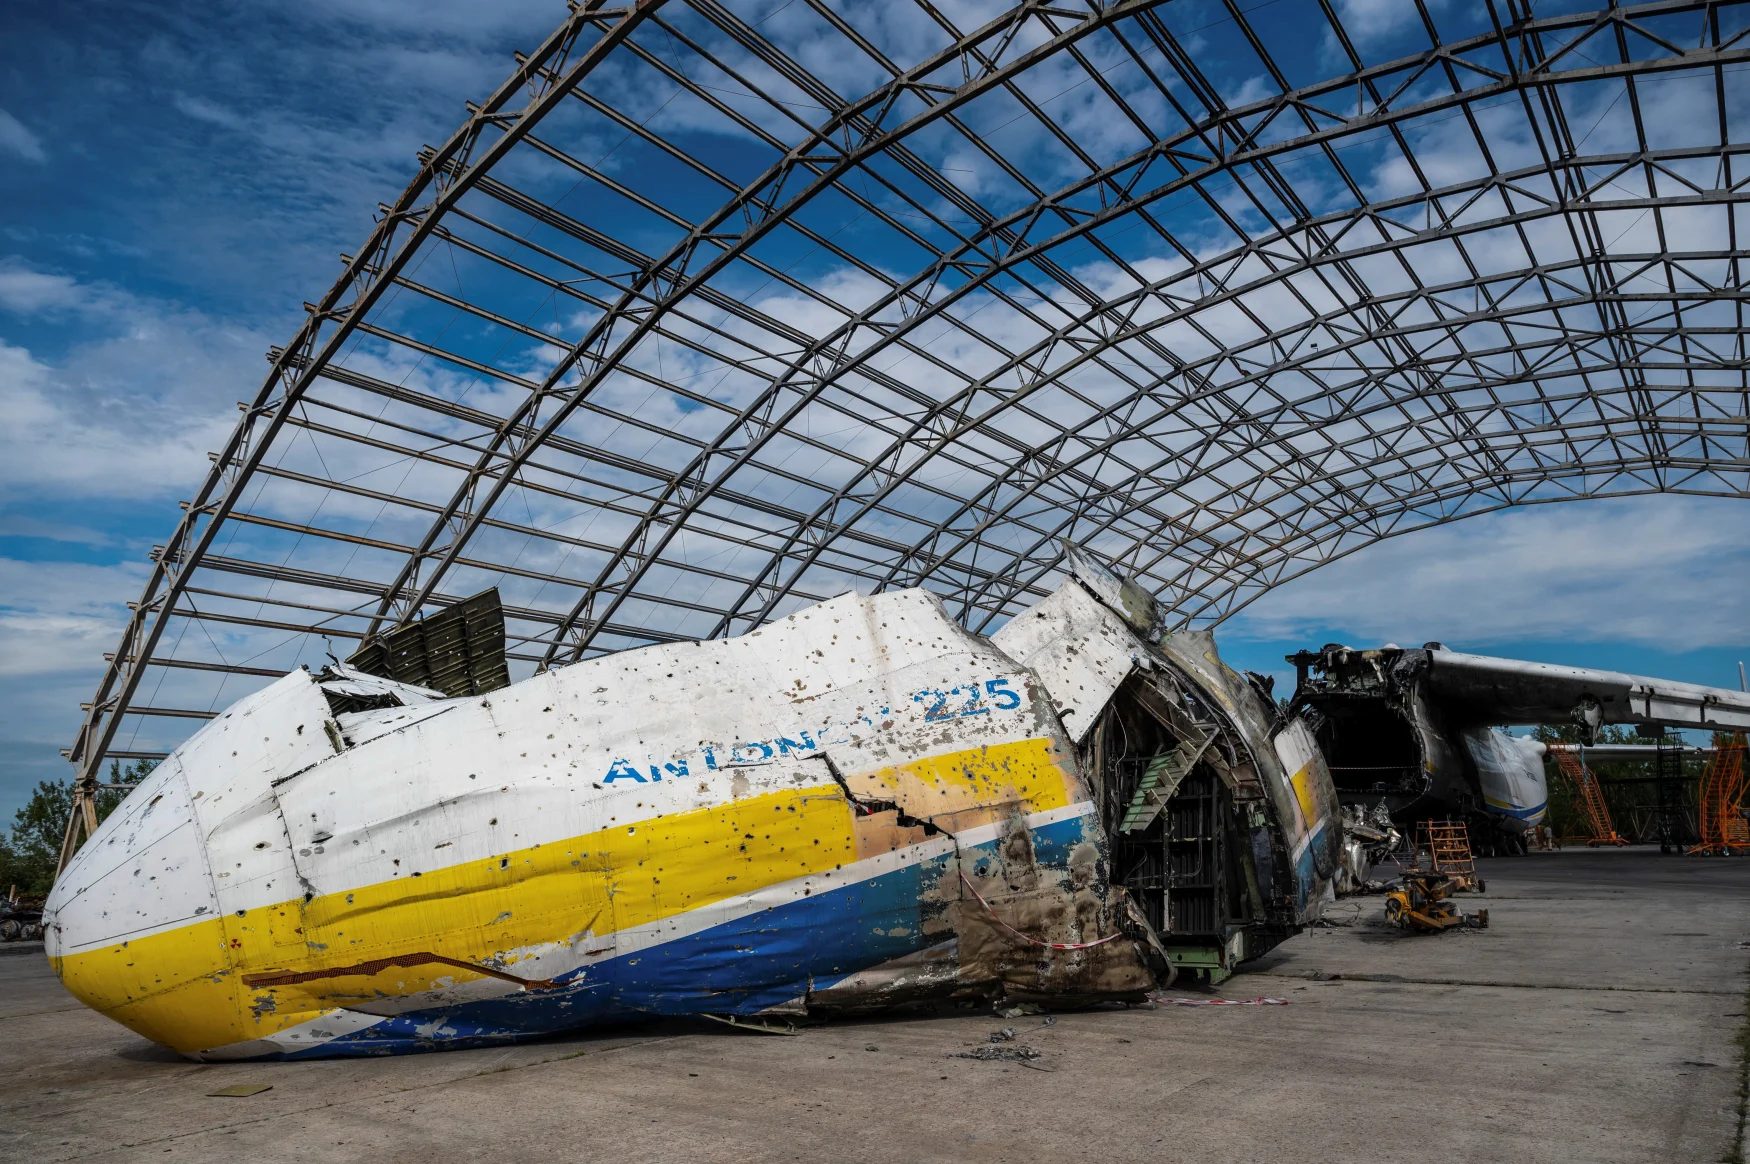 An Antonov An-225 Mriya cargo plane, the world's biggest aircraft, destroyed by Russian troops amid Russia's attack on Ukraine continues, is seen at an airfield in the settlement of Hostomel, in Kyiv region, Ukraine August 10, 2023. REUTERS/Viacheslav Ratynskyi